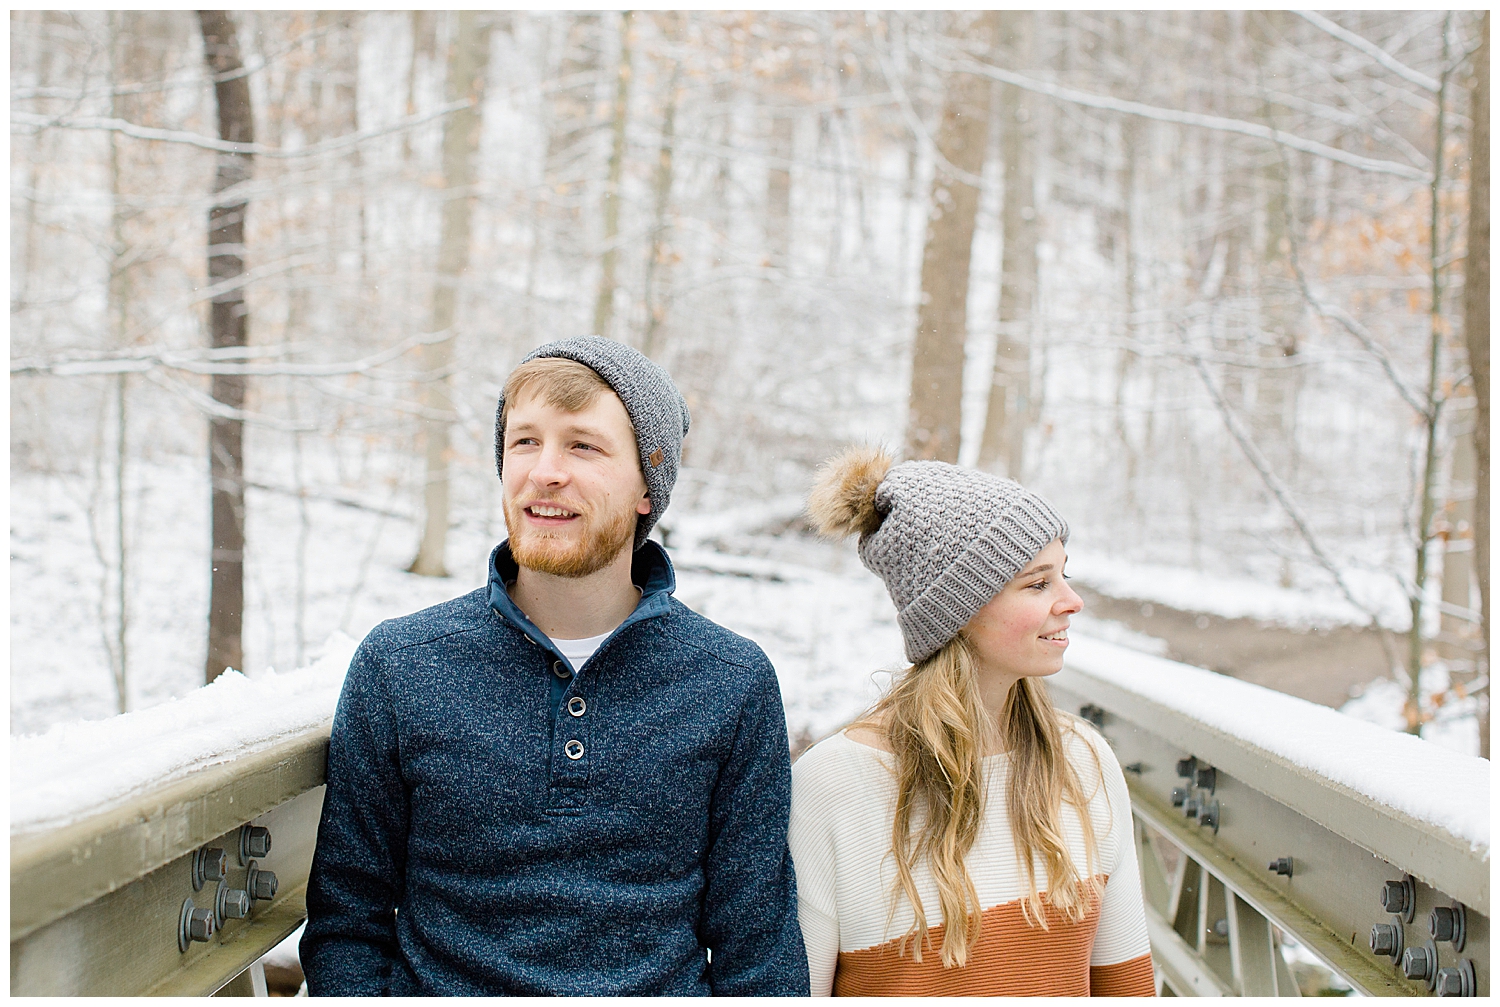 Blue_Hen_Falls_Peninsula_Ohio_Cuyahoga_Valley_National_Park_Winter_Engagement_Kate_Mannella_Photography2